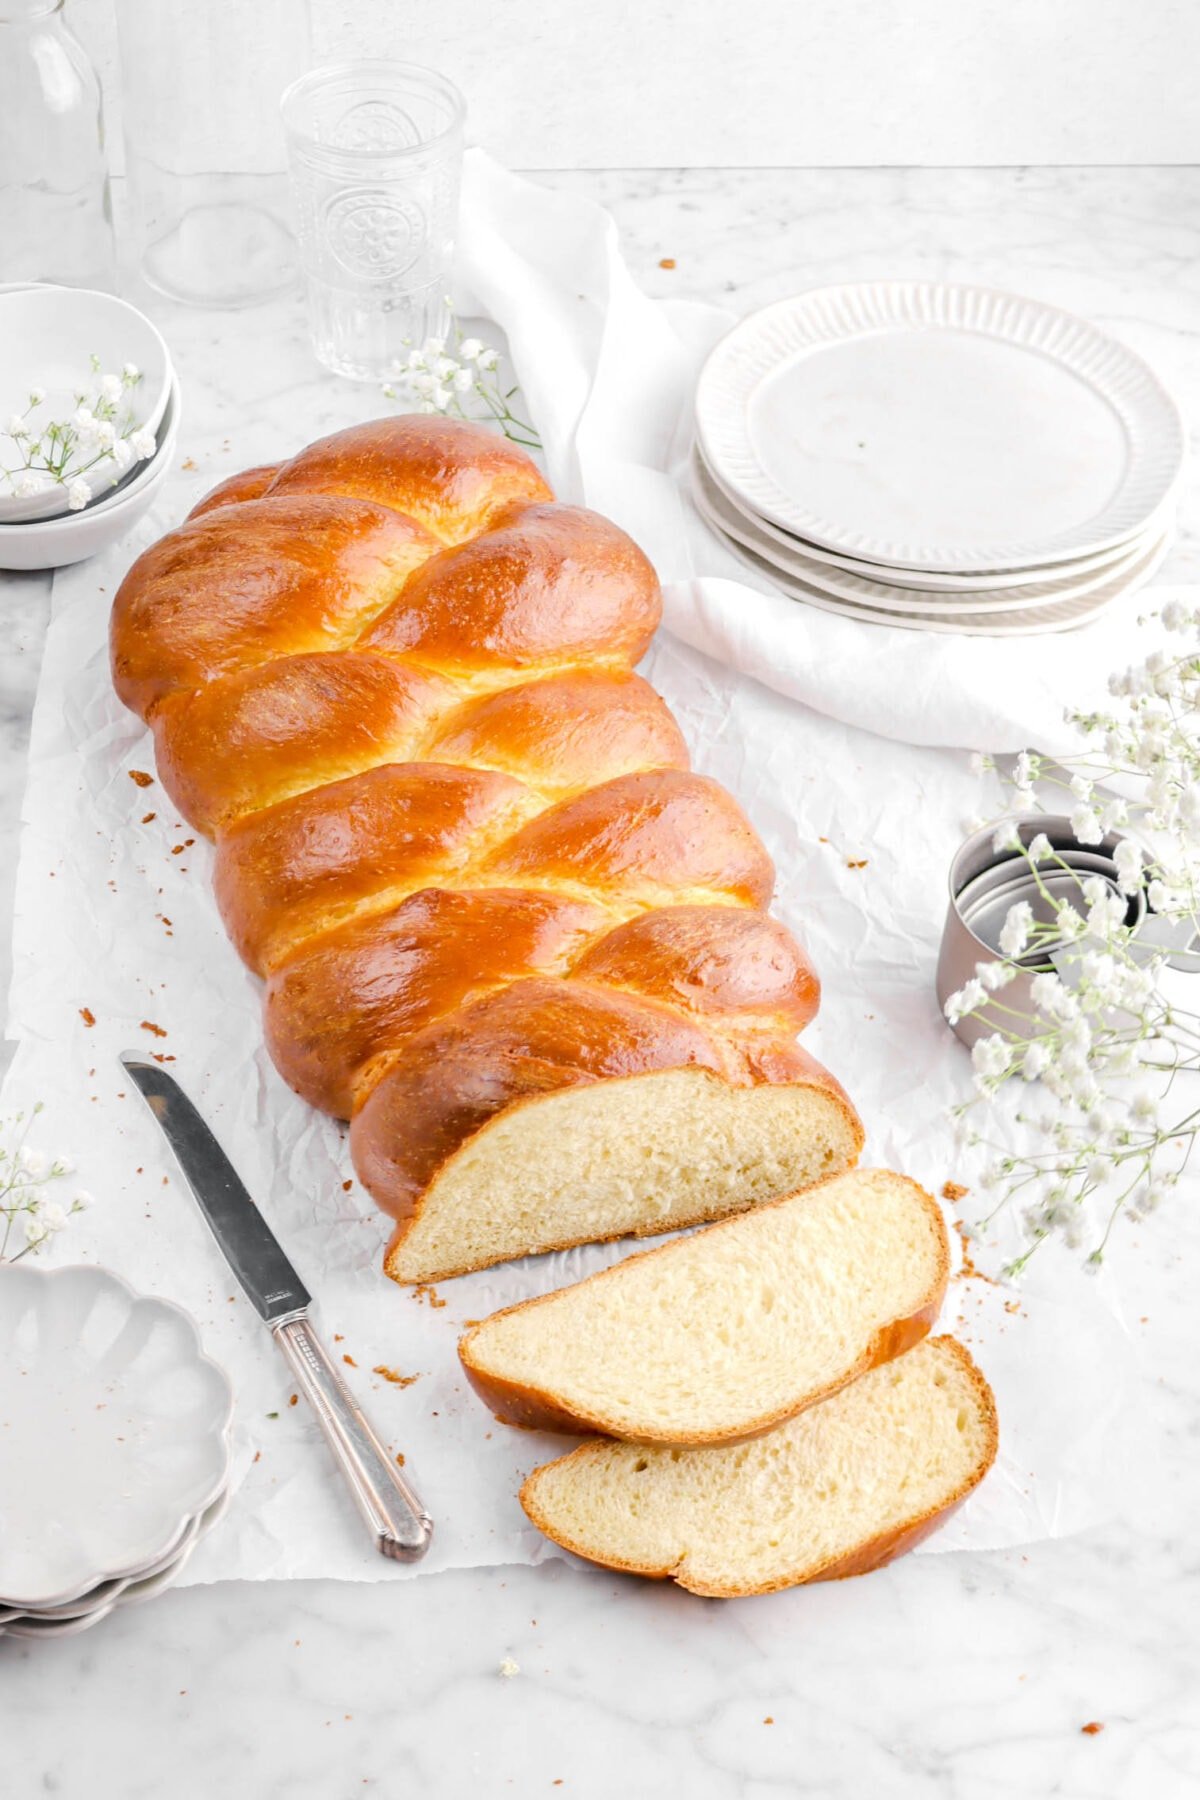 angled shot of challah with two slices laying in front with plates, flowers, and a knife